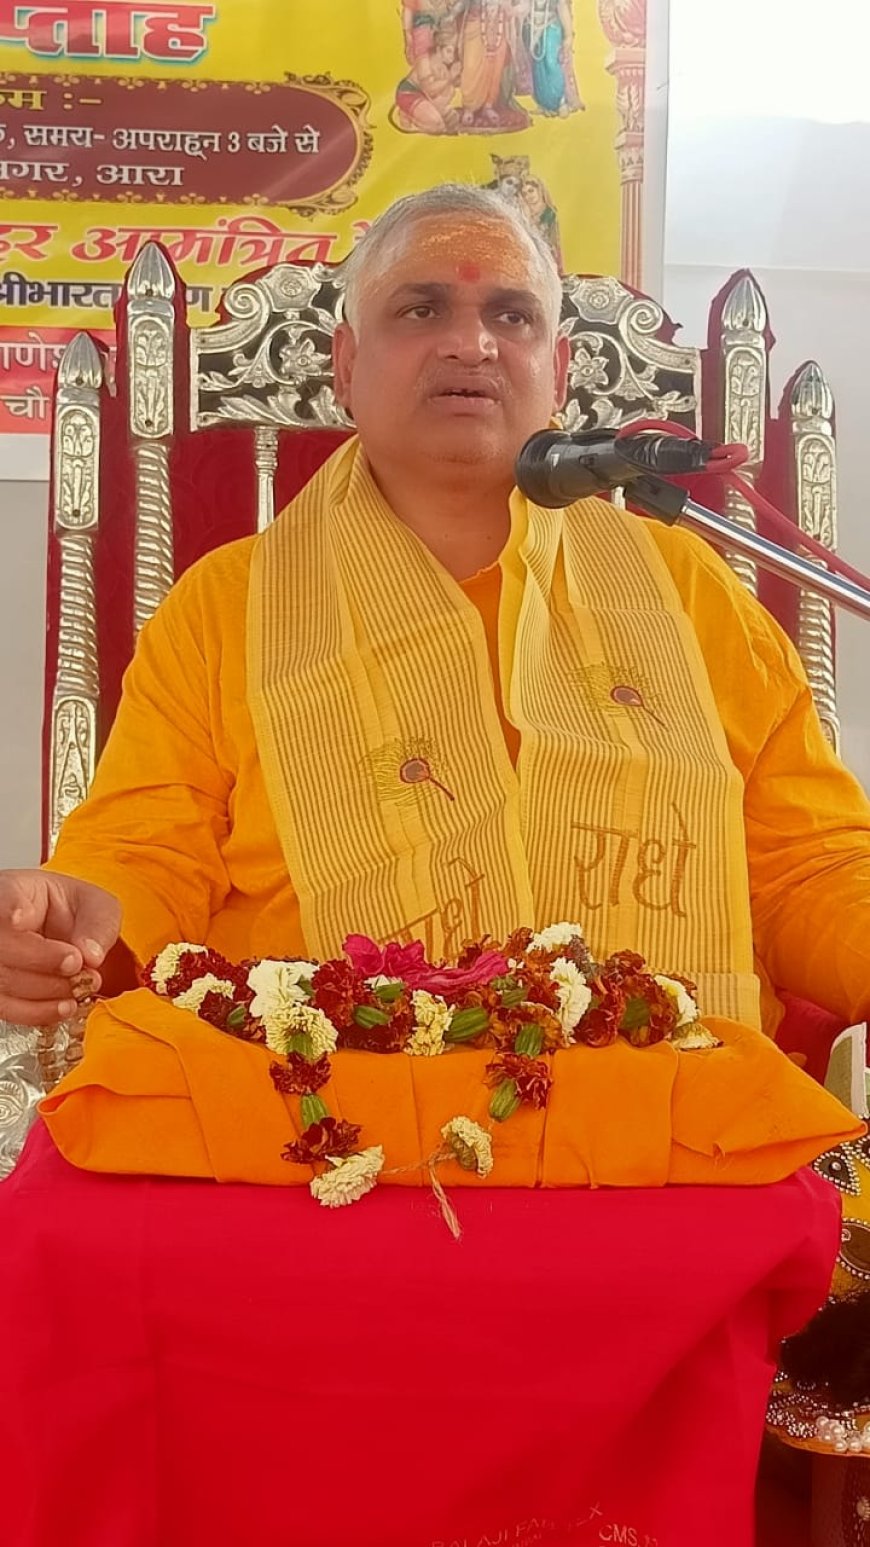 SURRENDER TO GOD IS THE ULTIMATE GOAL OF LIFE—ACHARYA BHARAT BHUSHAN PANDEY